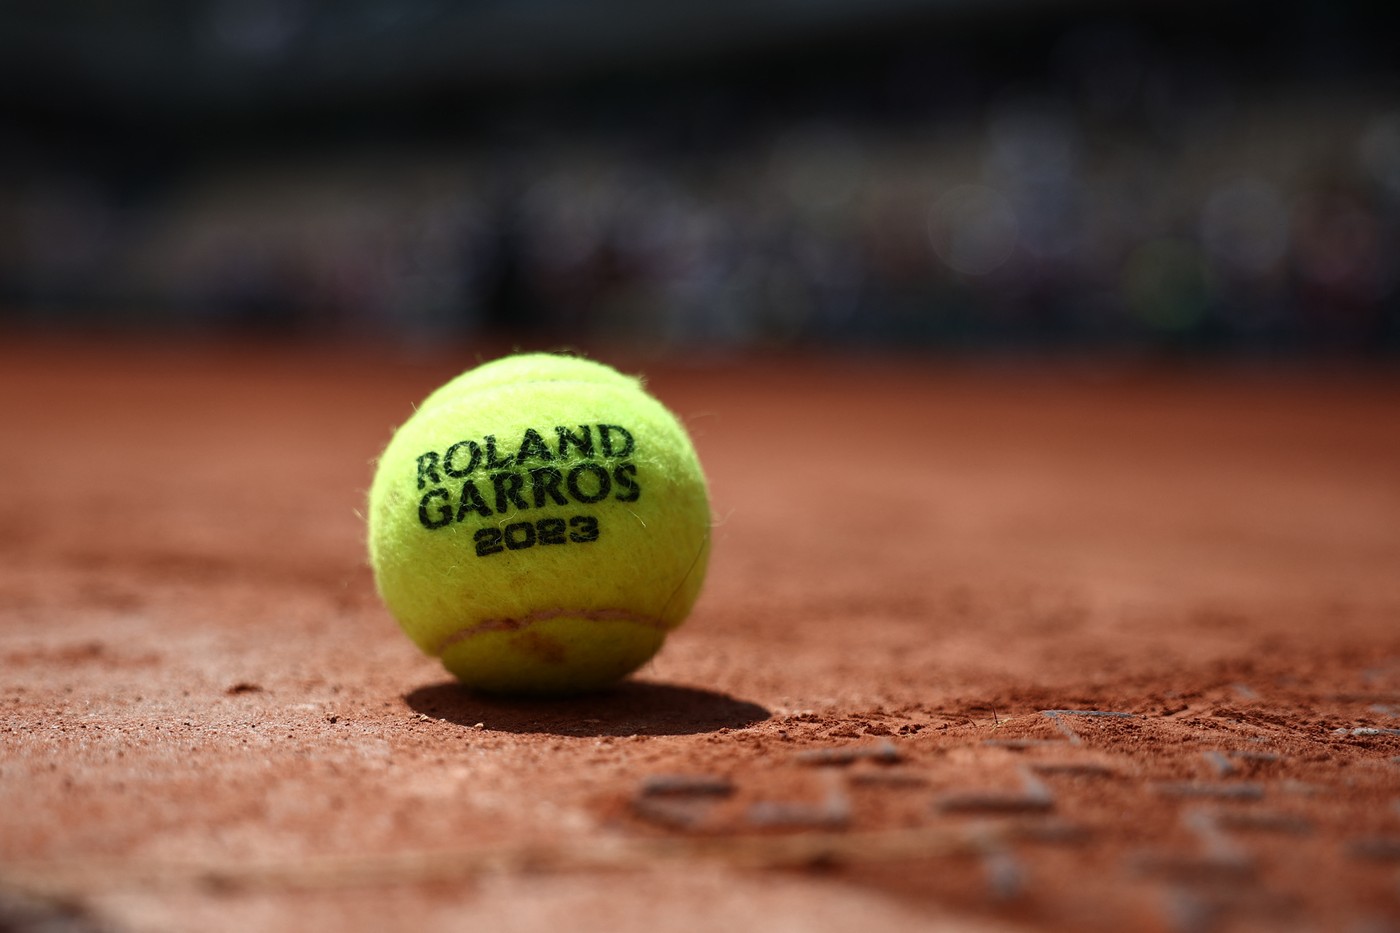 An official ball lies on the surface of Court Simonne Mathieu ahead of the Roland-Garros Open tennis tournament in Paris on May 27, 2023.
  Novak Djokovic will bid for a record-breaking 23rd Grand Slam title at a French Open without his old rival Rafael Nadal for the first time since 2004, while Iga Swiatek attempts to become the first woman to defend the title in 16 years int eh tournament which starts on May 28.,Image: 779641326, License: Rights-managed, Restrictions: , Model Release: no, Credit line: Anne-Christine POUJOULAT / AFP / Profimedia